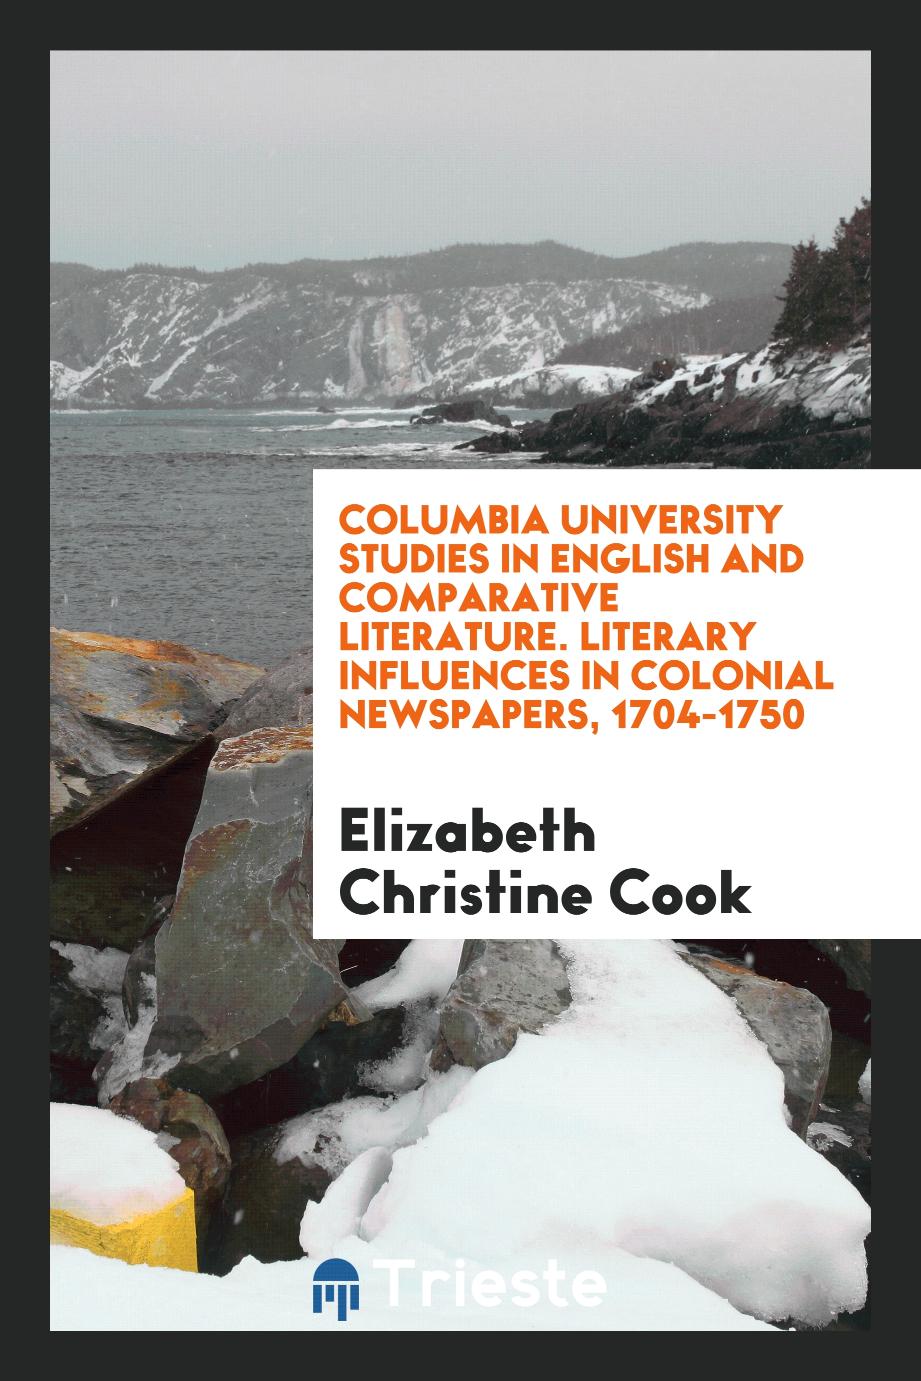 Columbia University Studies in English and Comparative Literature. Literary Influences in Colonial Newspapers, 1704-1750